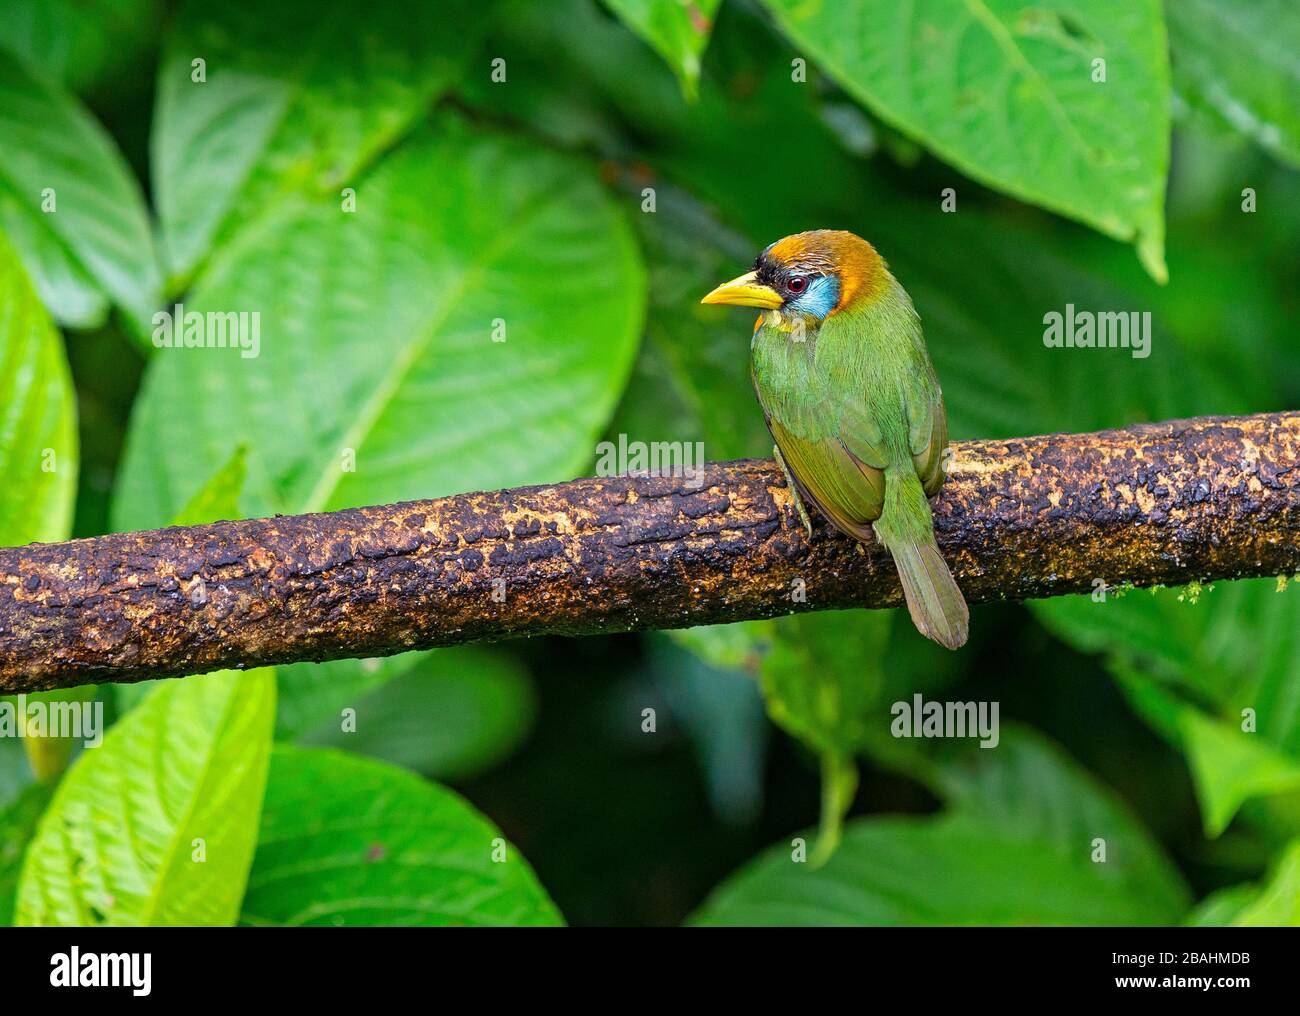 A female red headed Barbet (Eubucco bourcierii) on a branch, Capitonidae family. Photographed in Mindo, Ecuador, but found between Costa Rica and Peru. Stock Photo